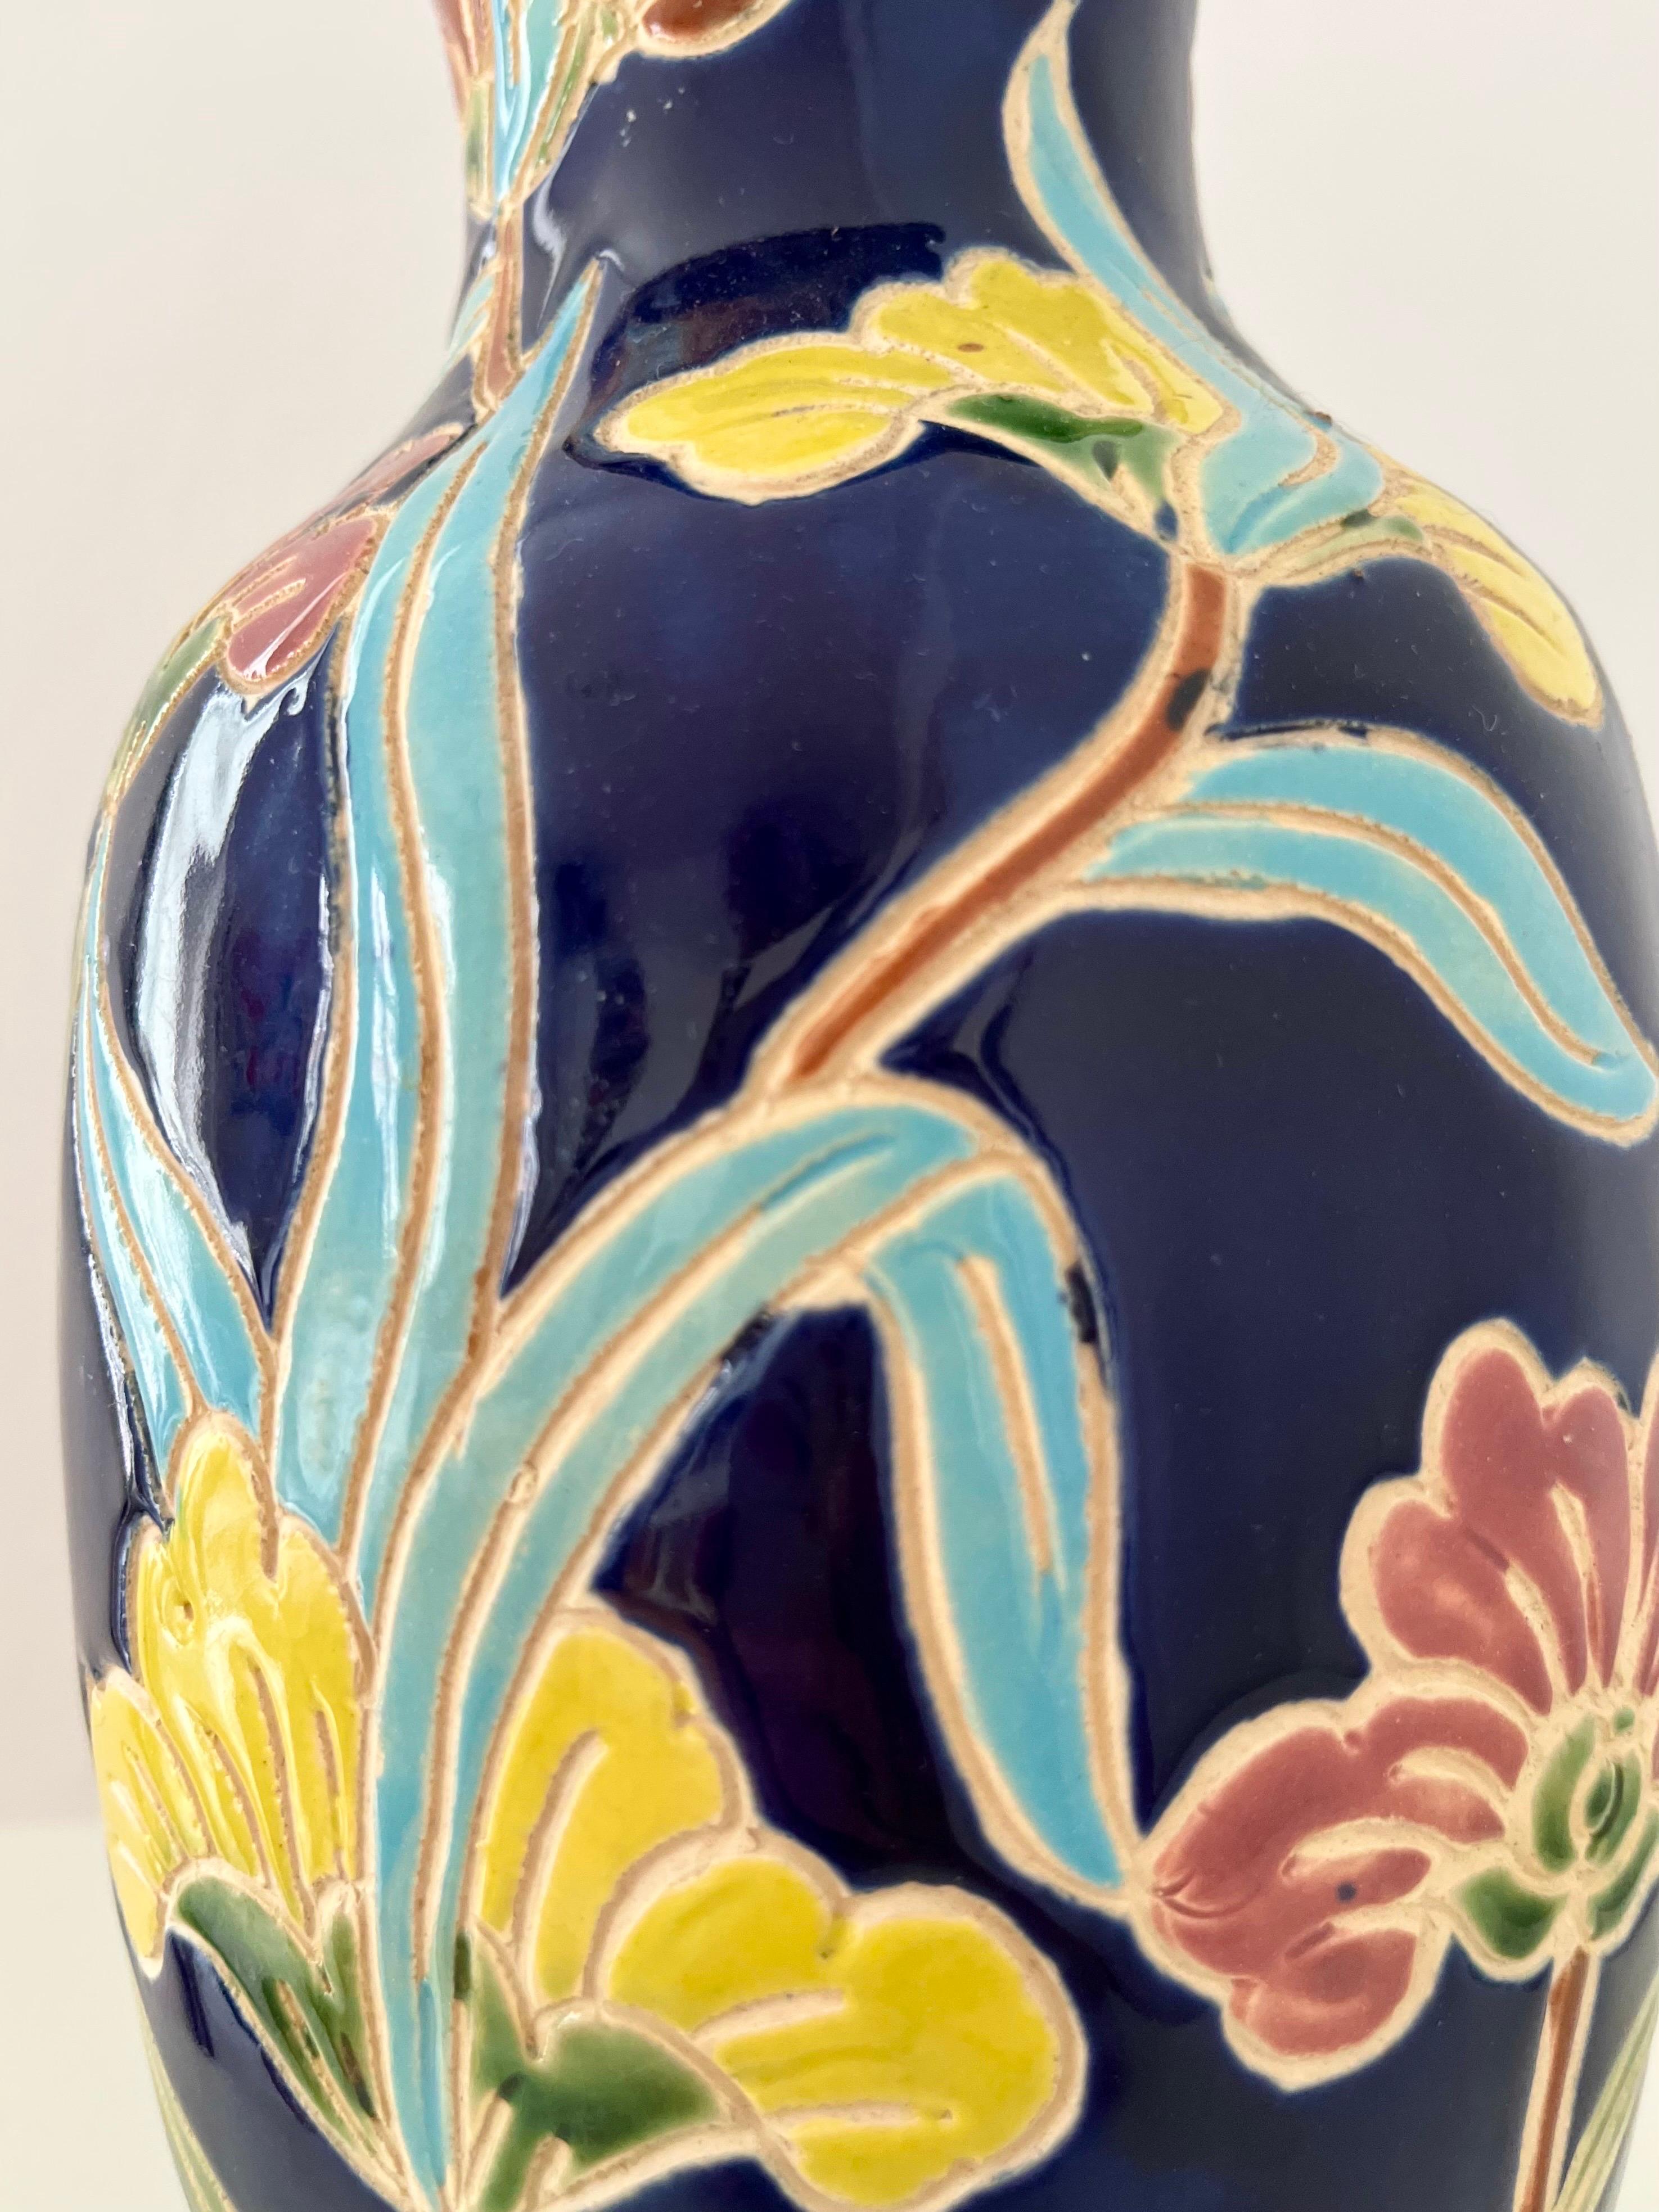 1960s/1970s Scandinavian Organic Modern Ceramic Vase with Colorful Floral Motifs For Sale 4